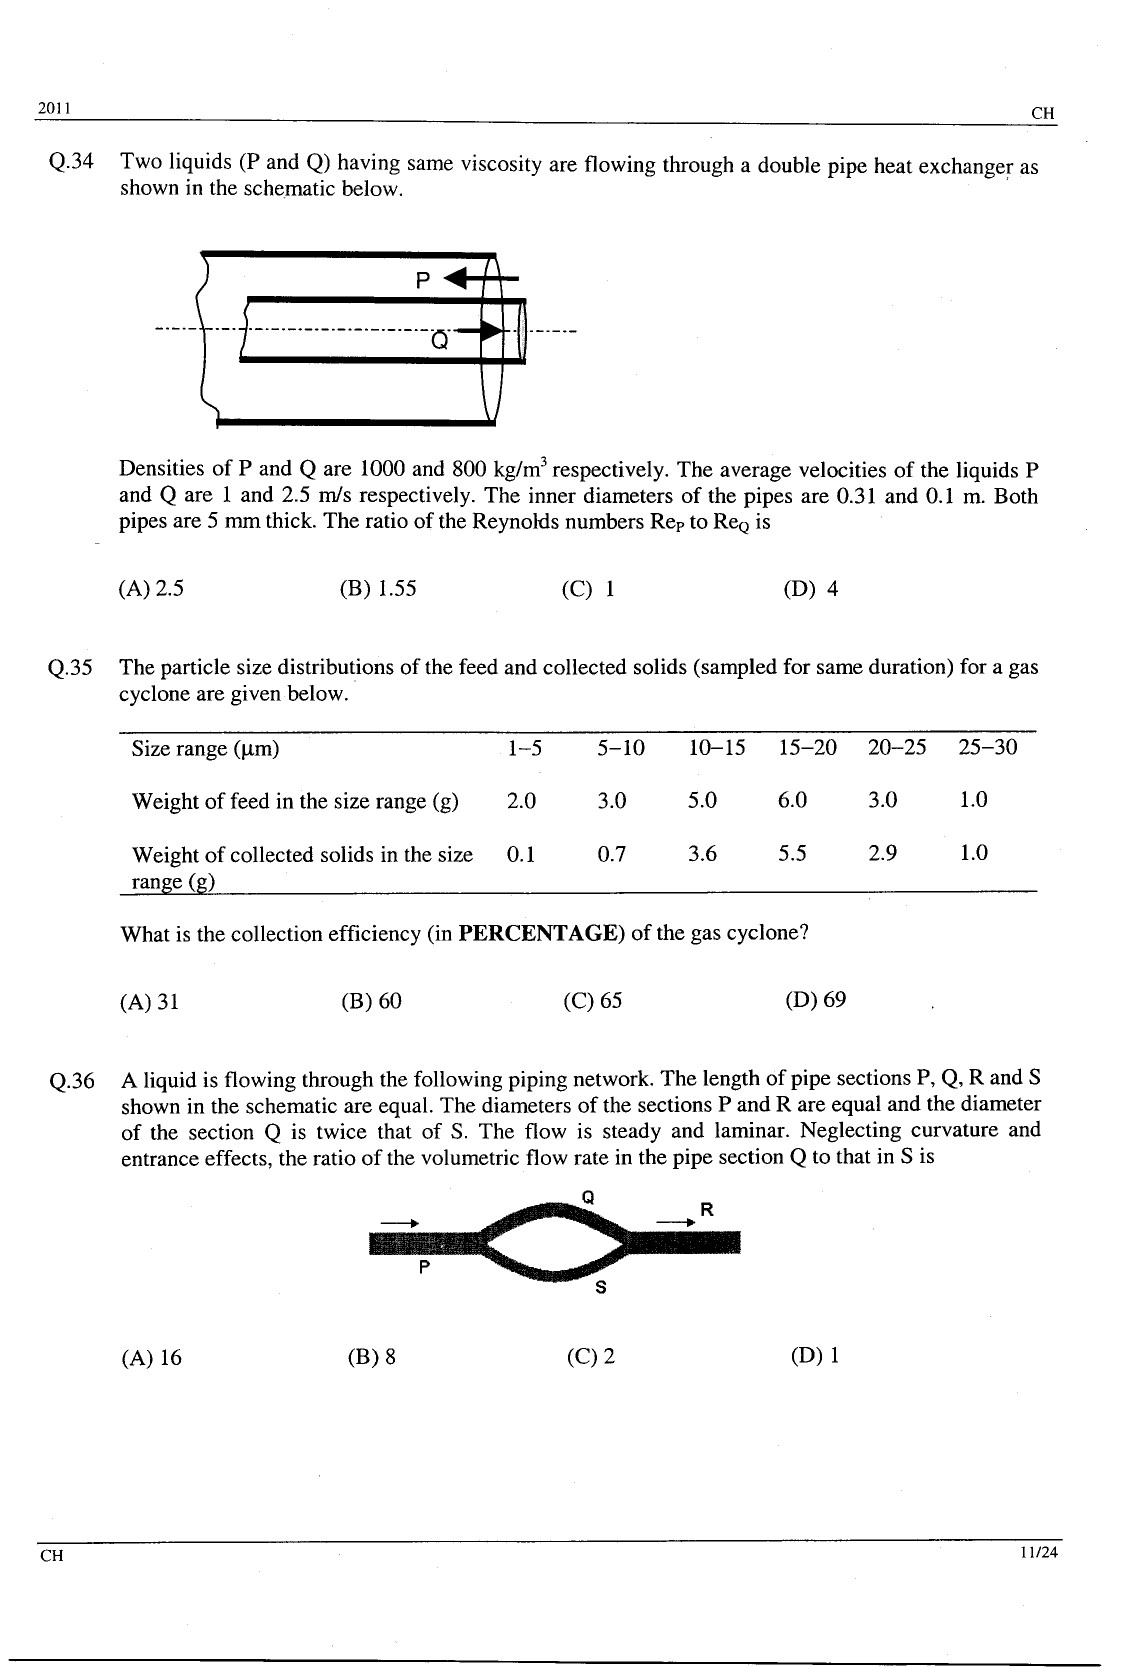 GATE Exam Question Paper 2011 Chemical Engineering 11